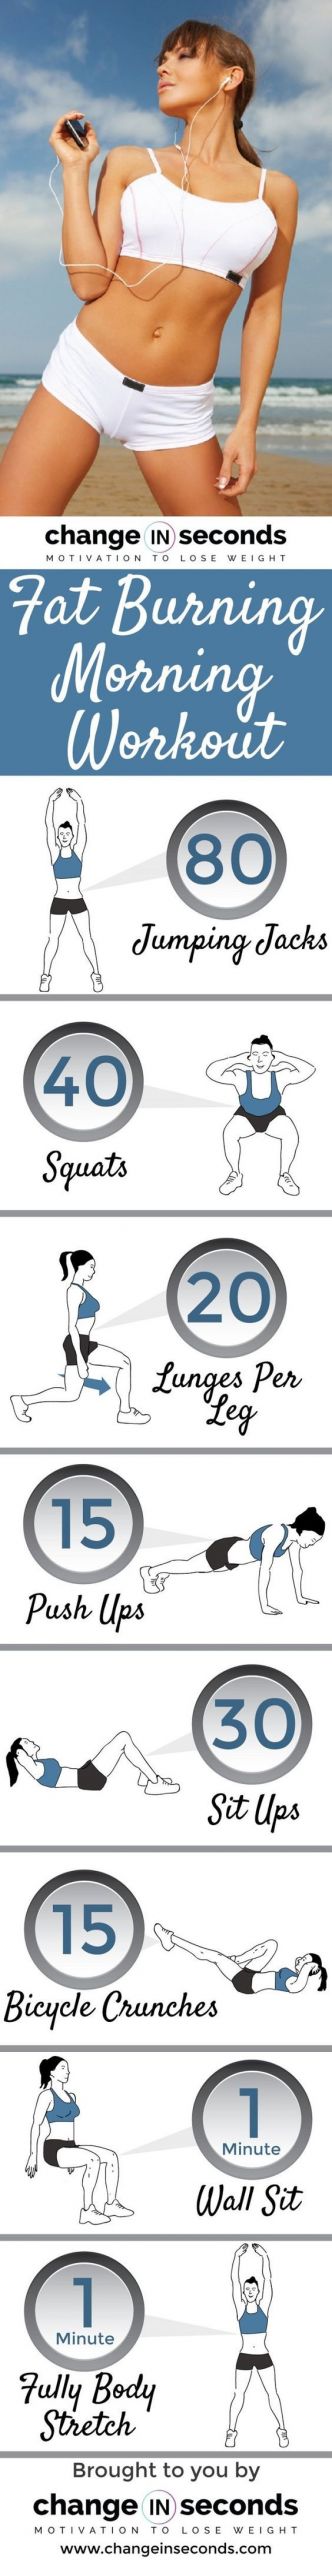 Morning Fat Burning Workout
 Morning workouts Fat burning and Mornings on Pinterest